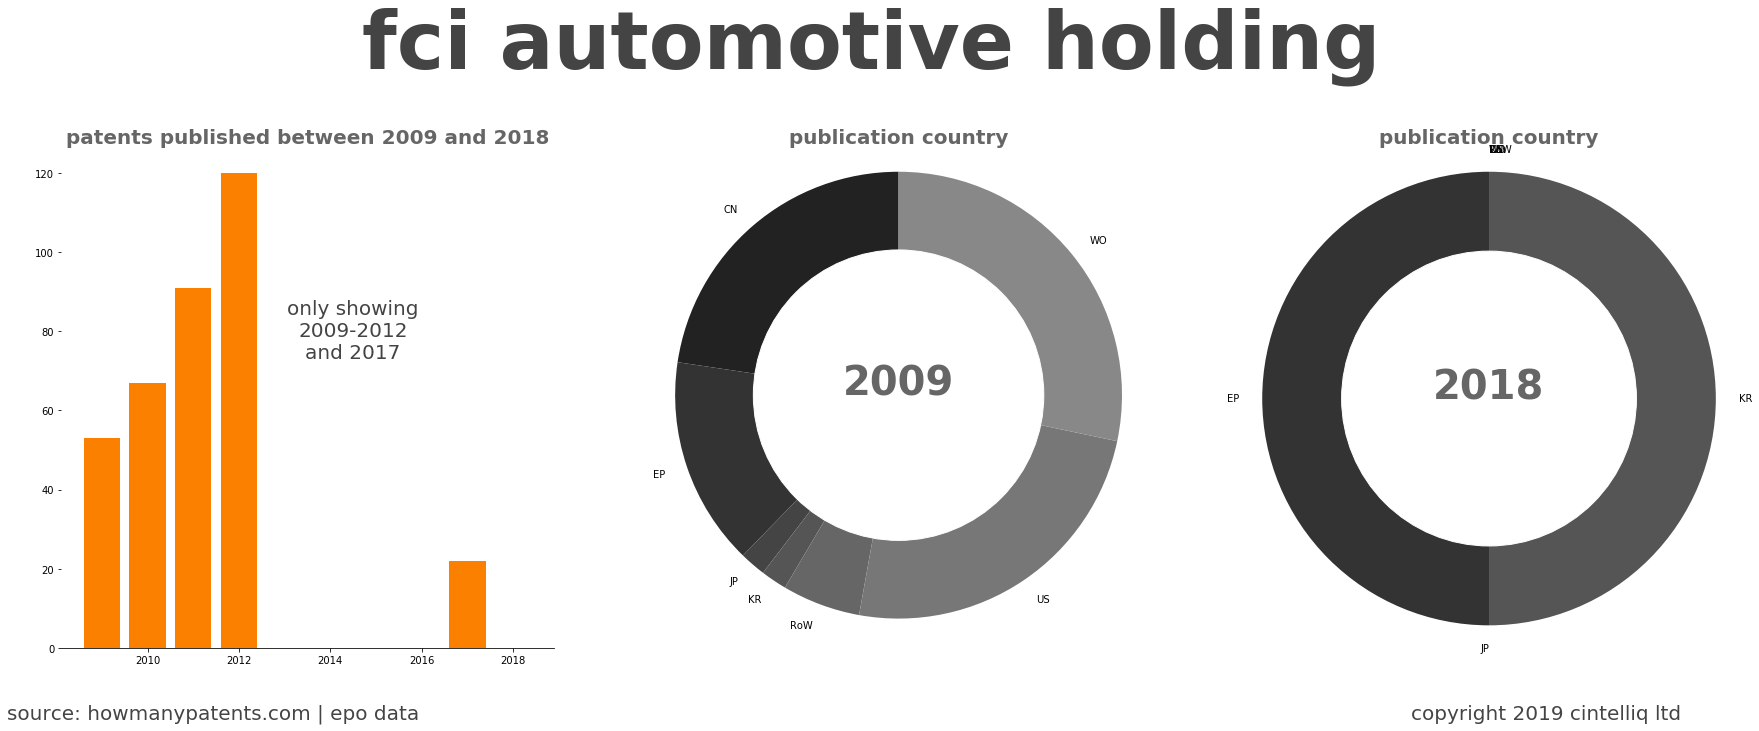 summary of patents for Fci Automotive Holding